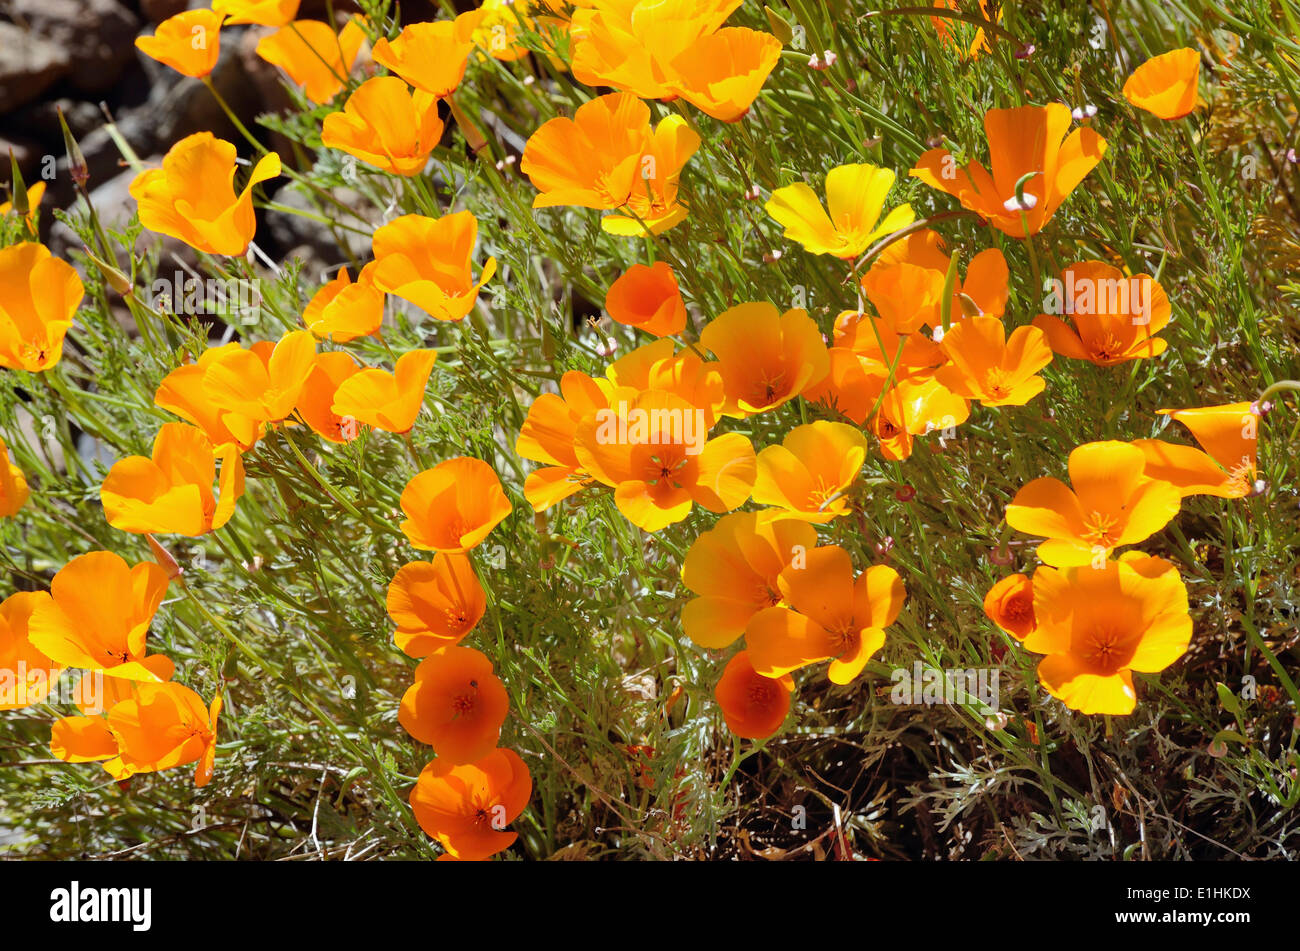 California Poppies or Golden Poppies (Eschscholtzia california) in the flower town of Vilaflor, Tenerife, Canary Islands, Spain Stock Photo